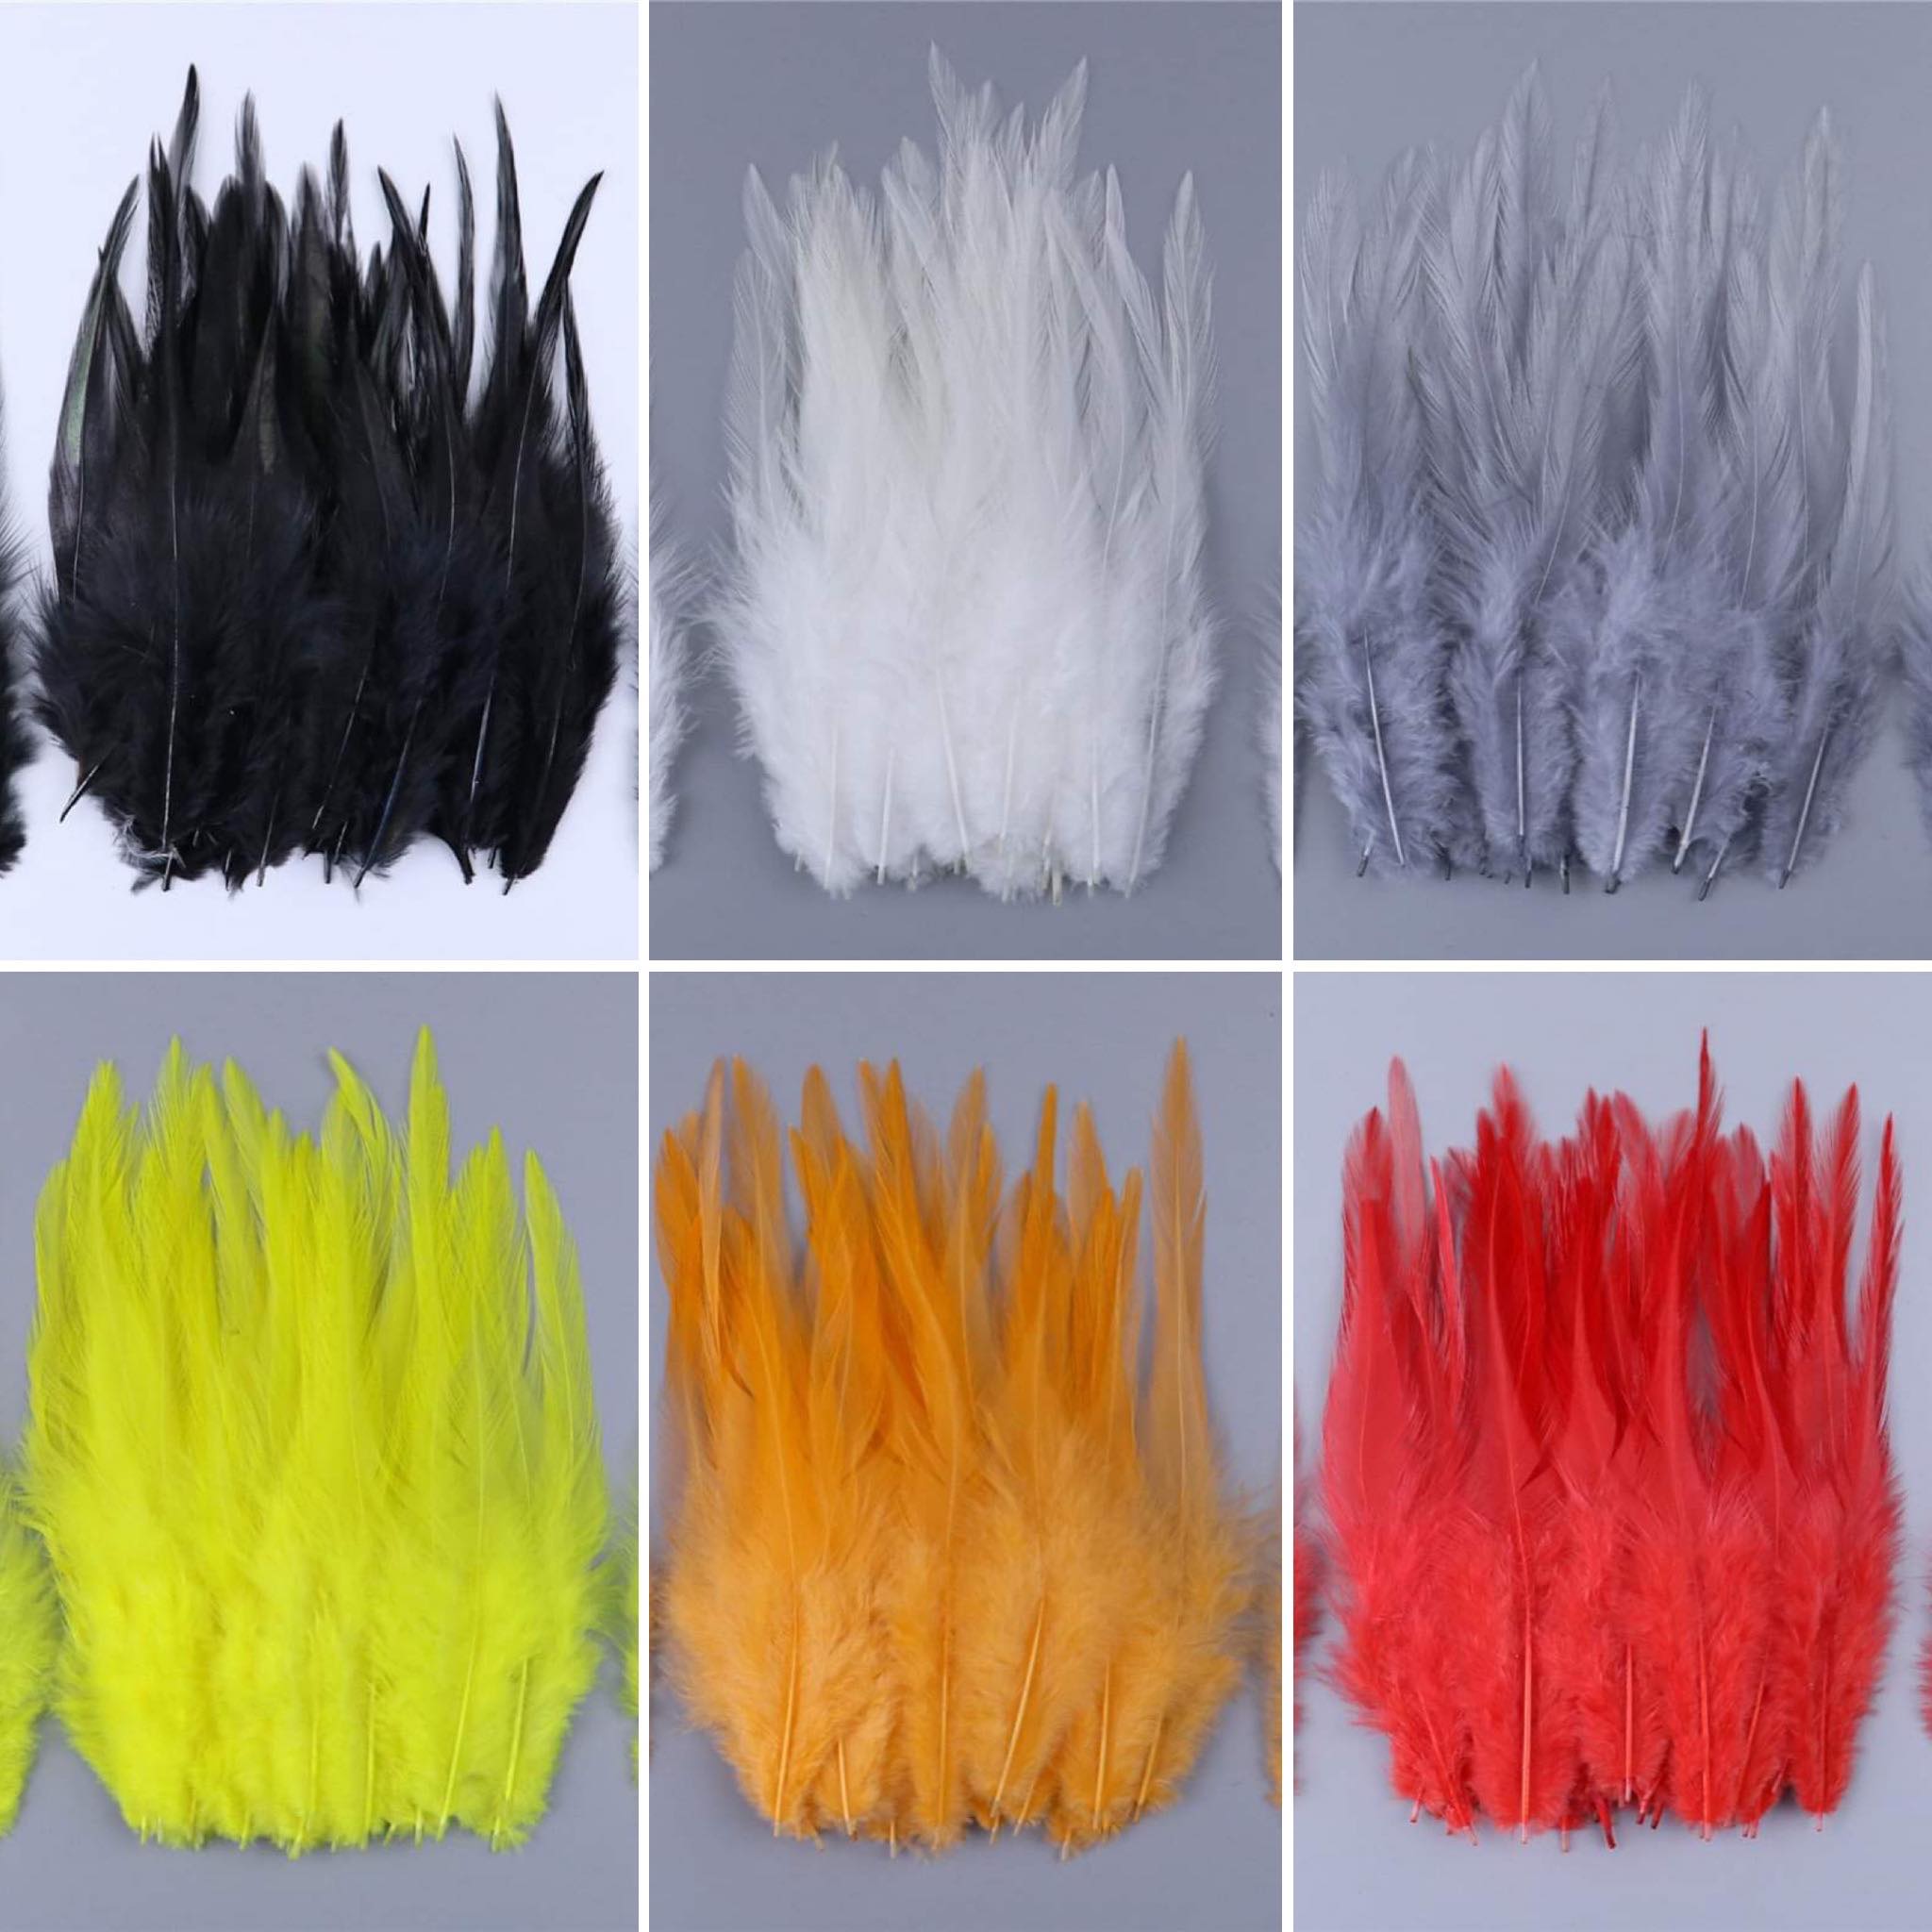 Saddle Hackle Feathers, Pike Tying Materials